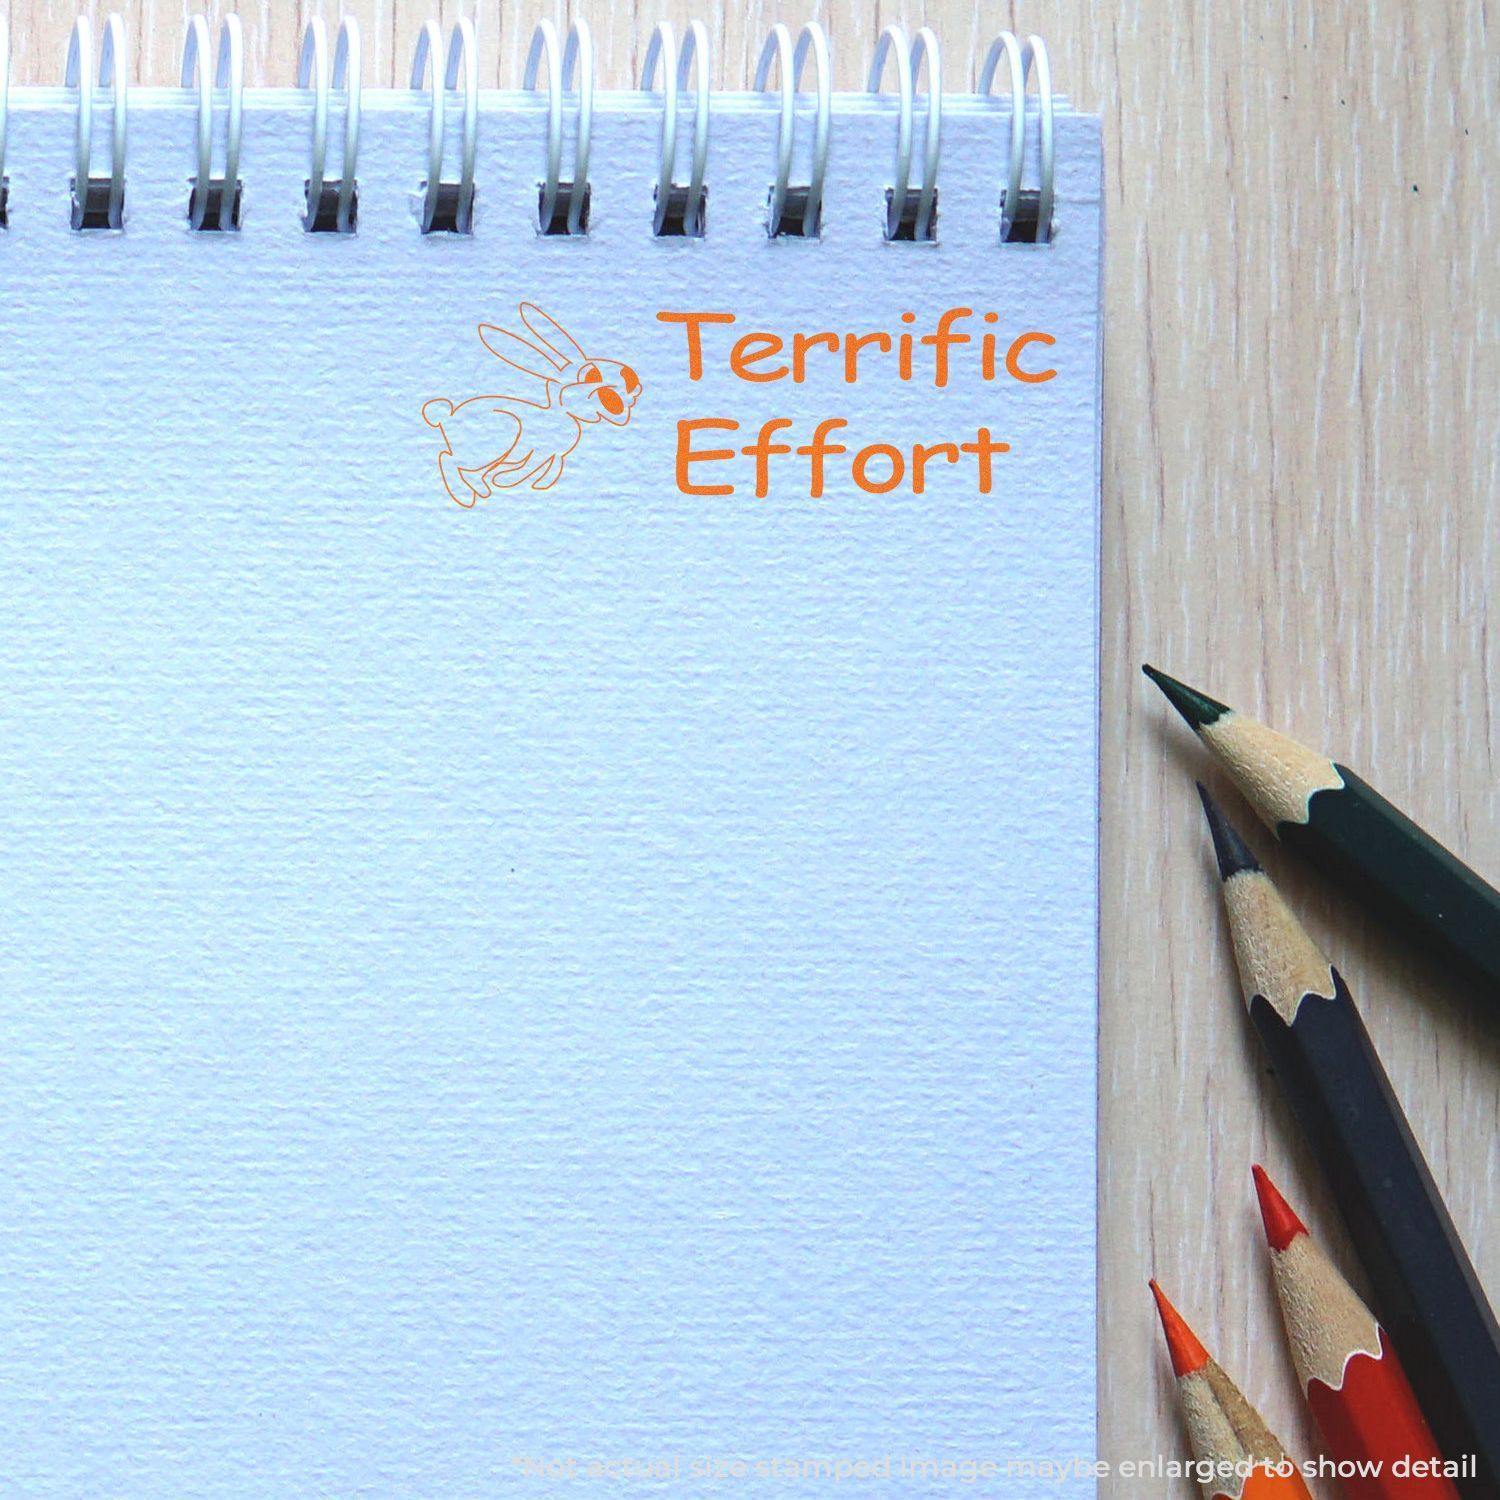 A self-inking stamp with a stamped image showing how the text "Terrific Effort" in a large font with a hopping rabbit on the left side is displayed by it after stamping.